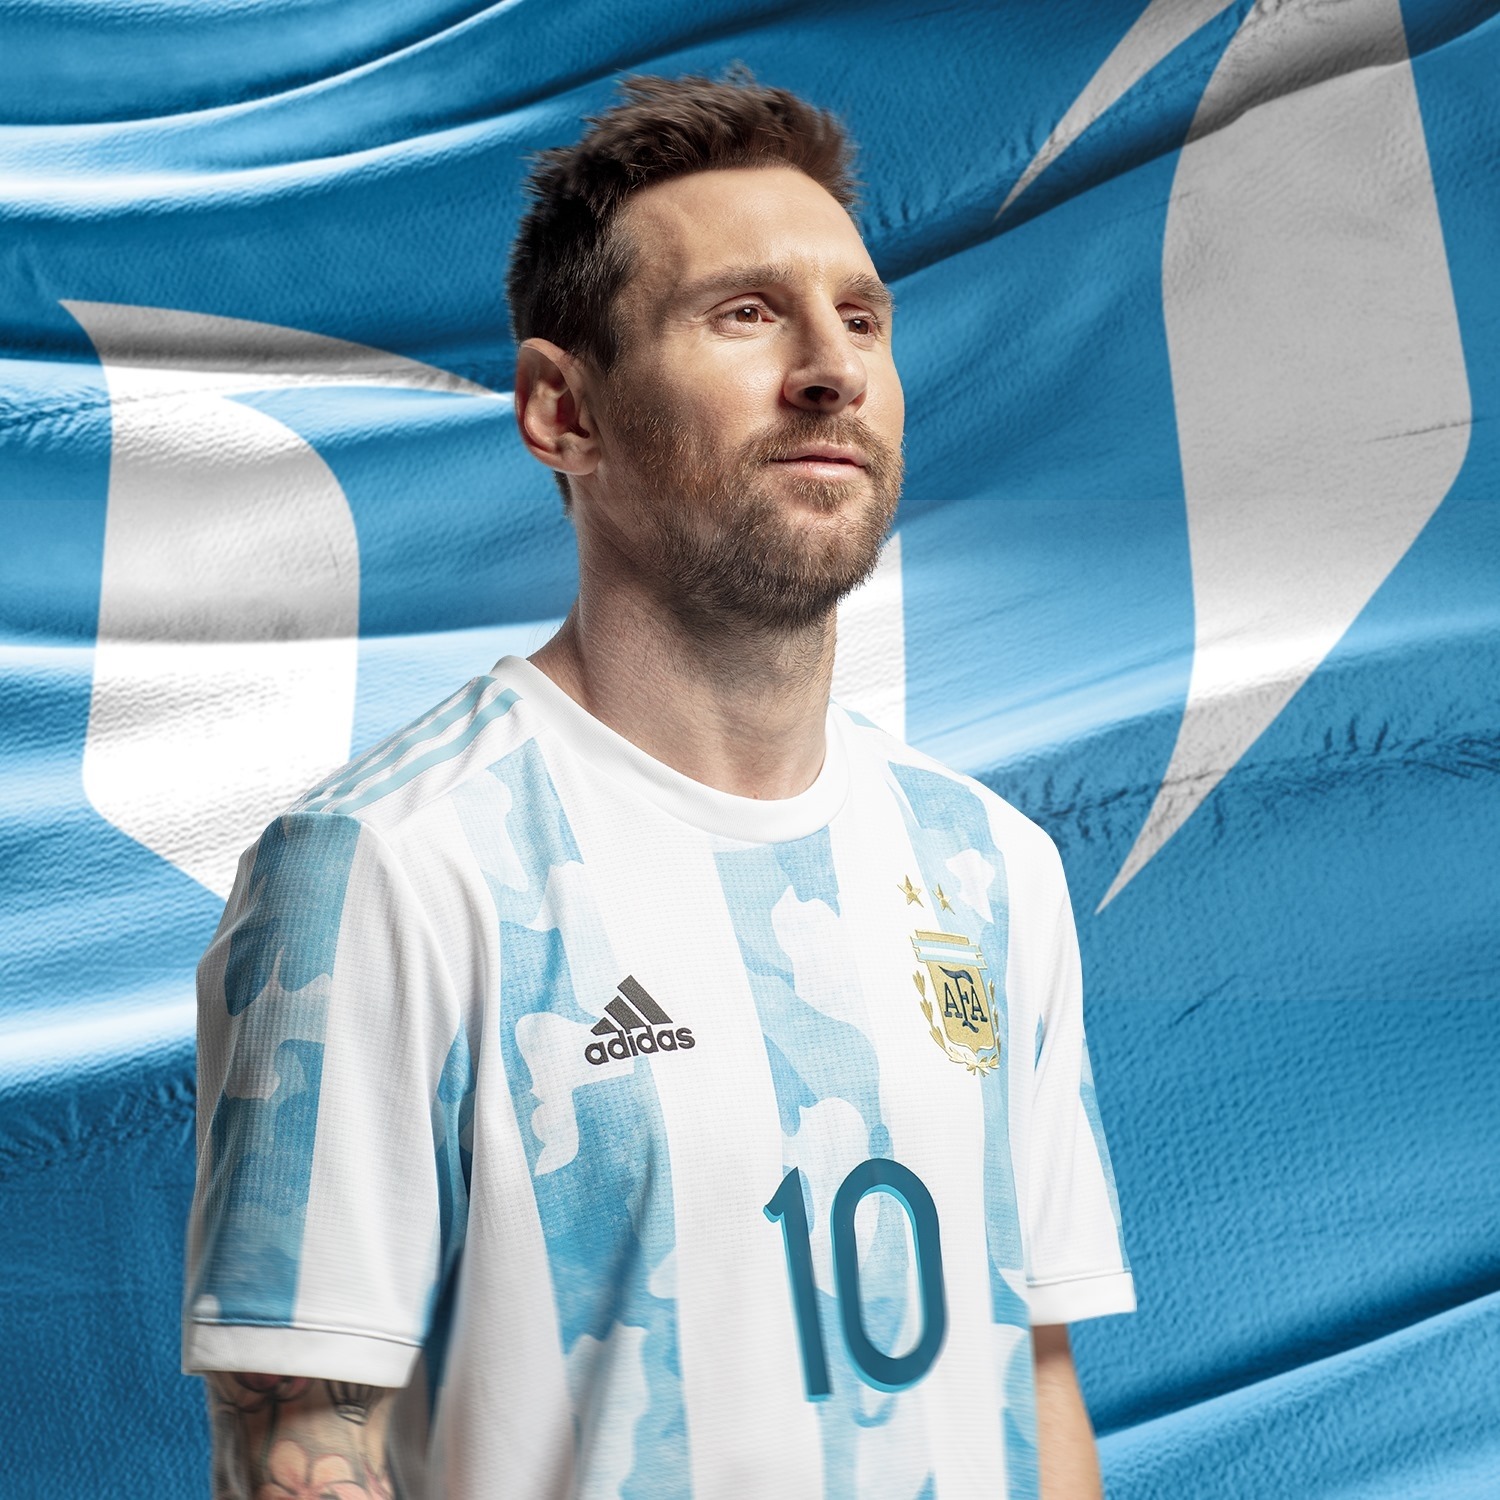 ‘I Am Grateful’: Lionel Messi Thanks God For His First Copa América